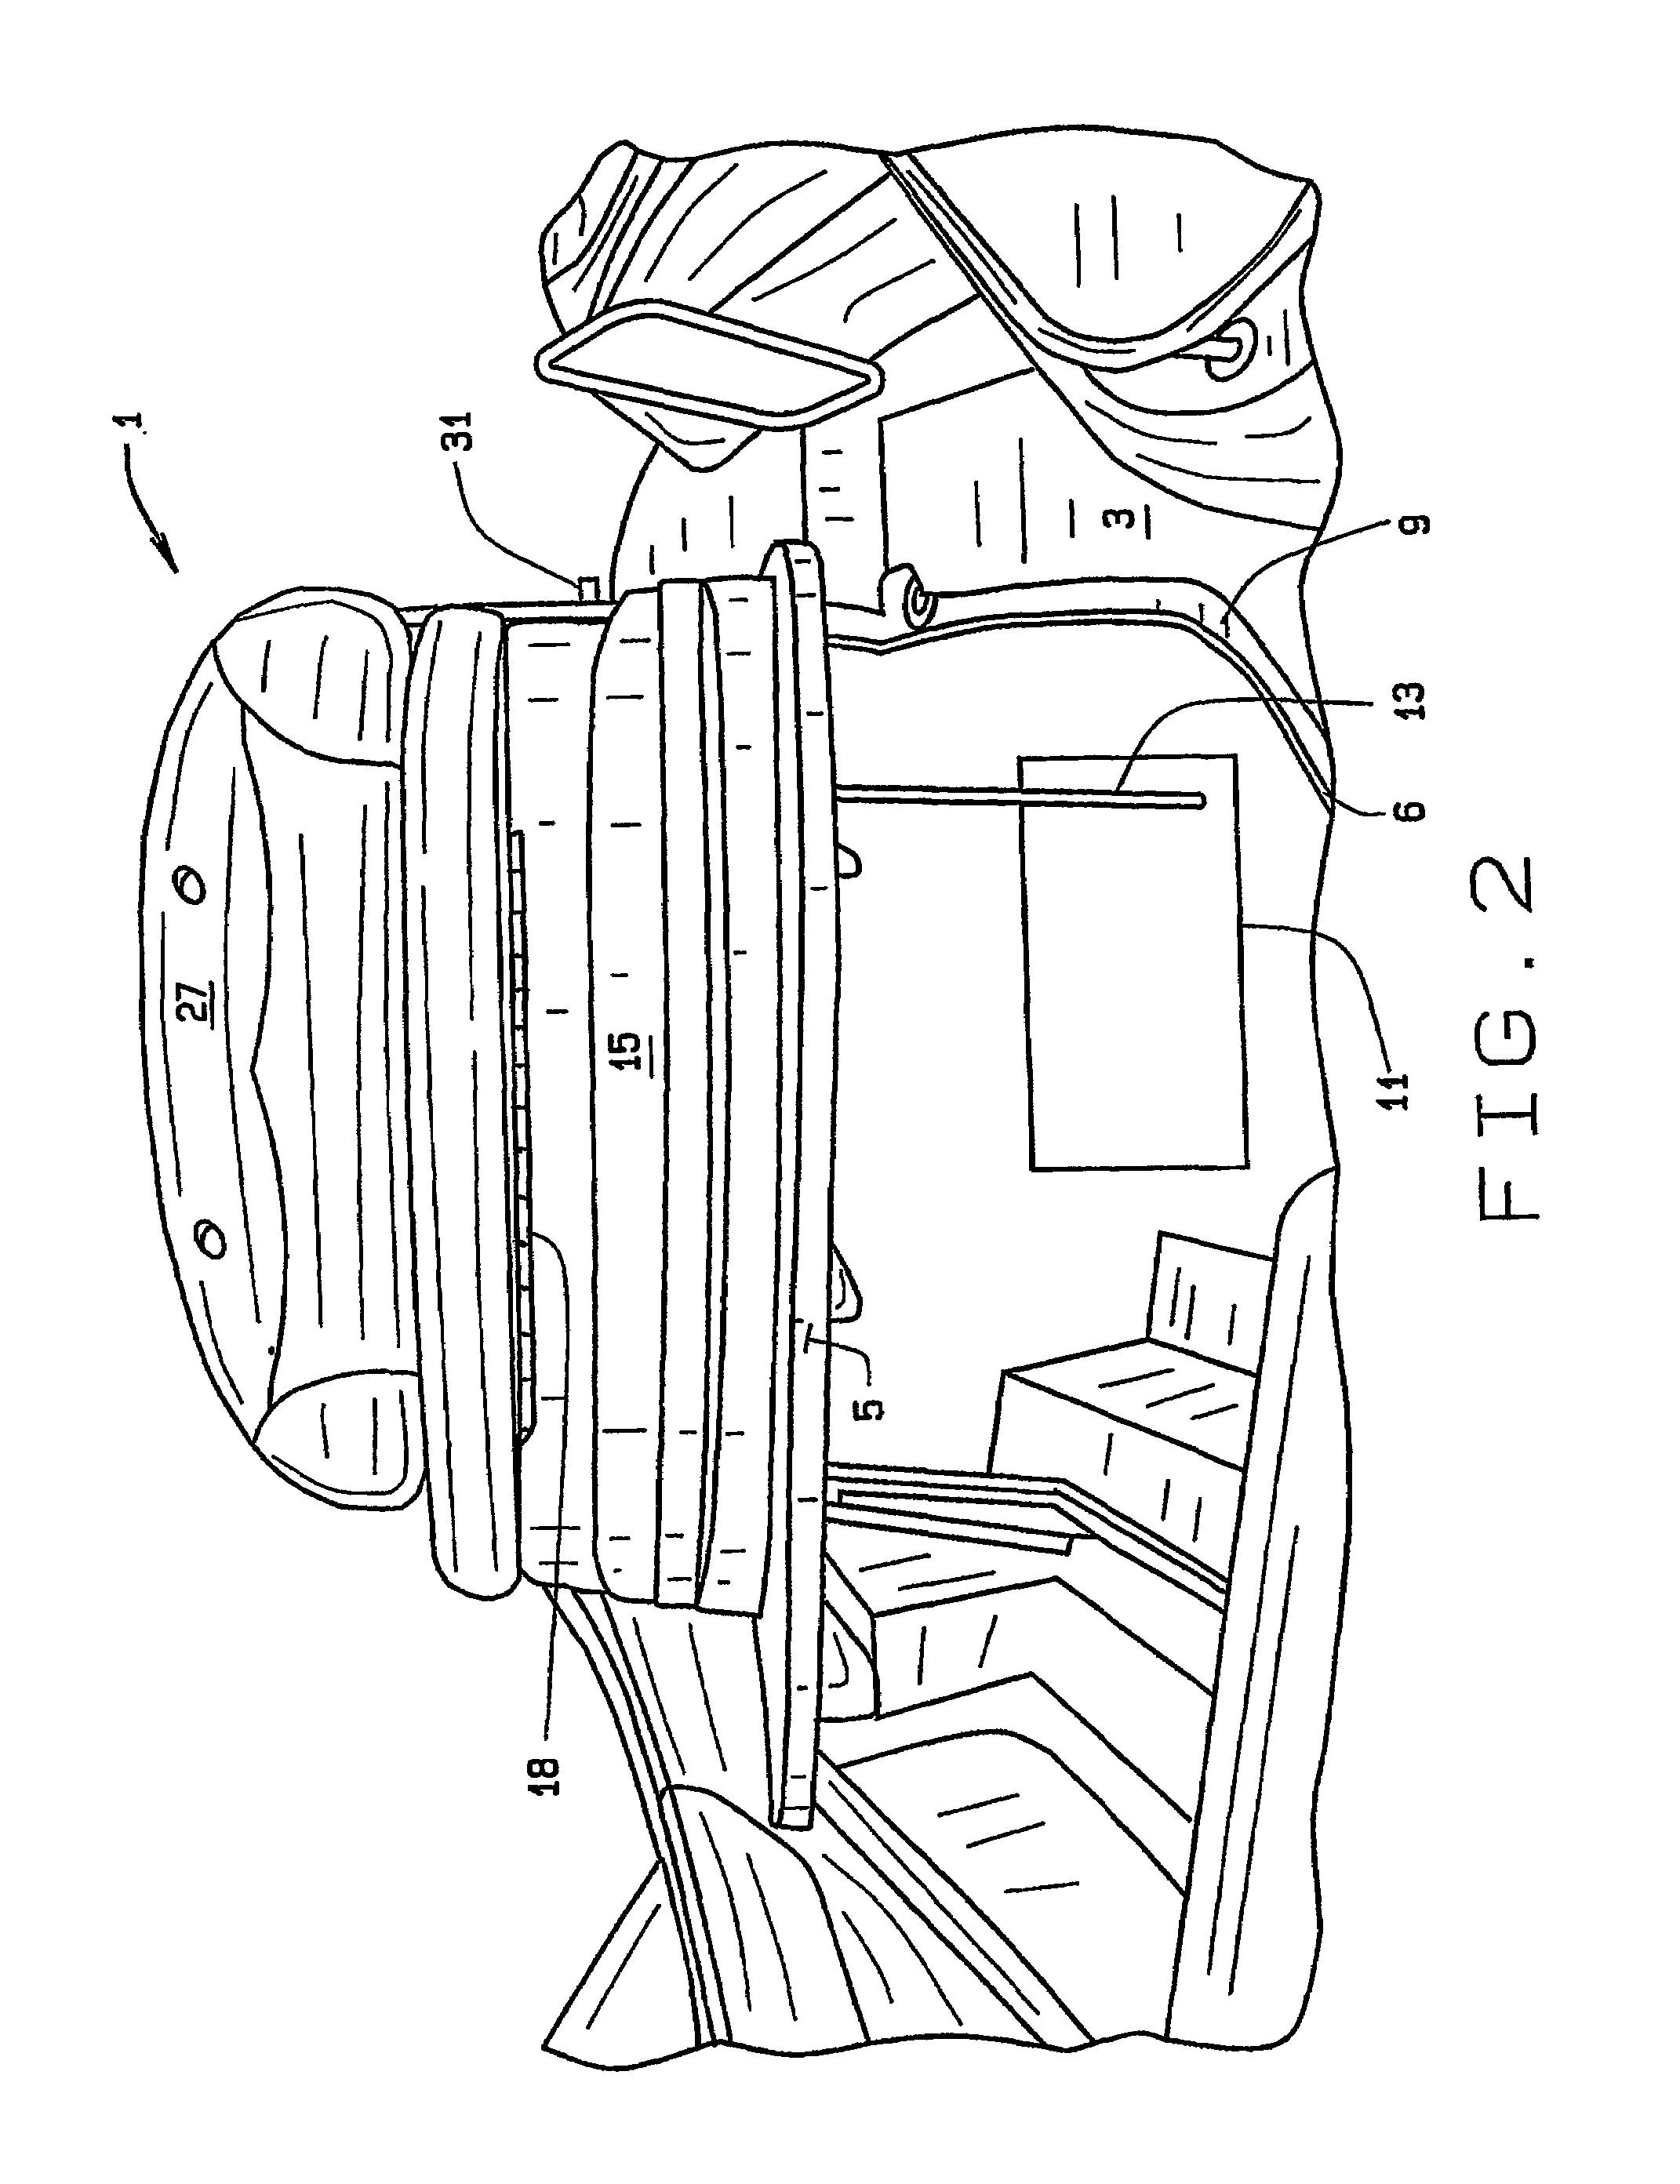 Hatch assembly with contiguous seating area